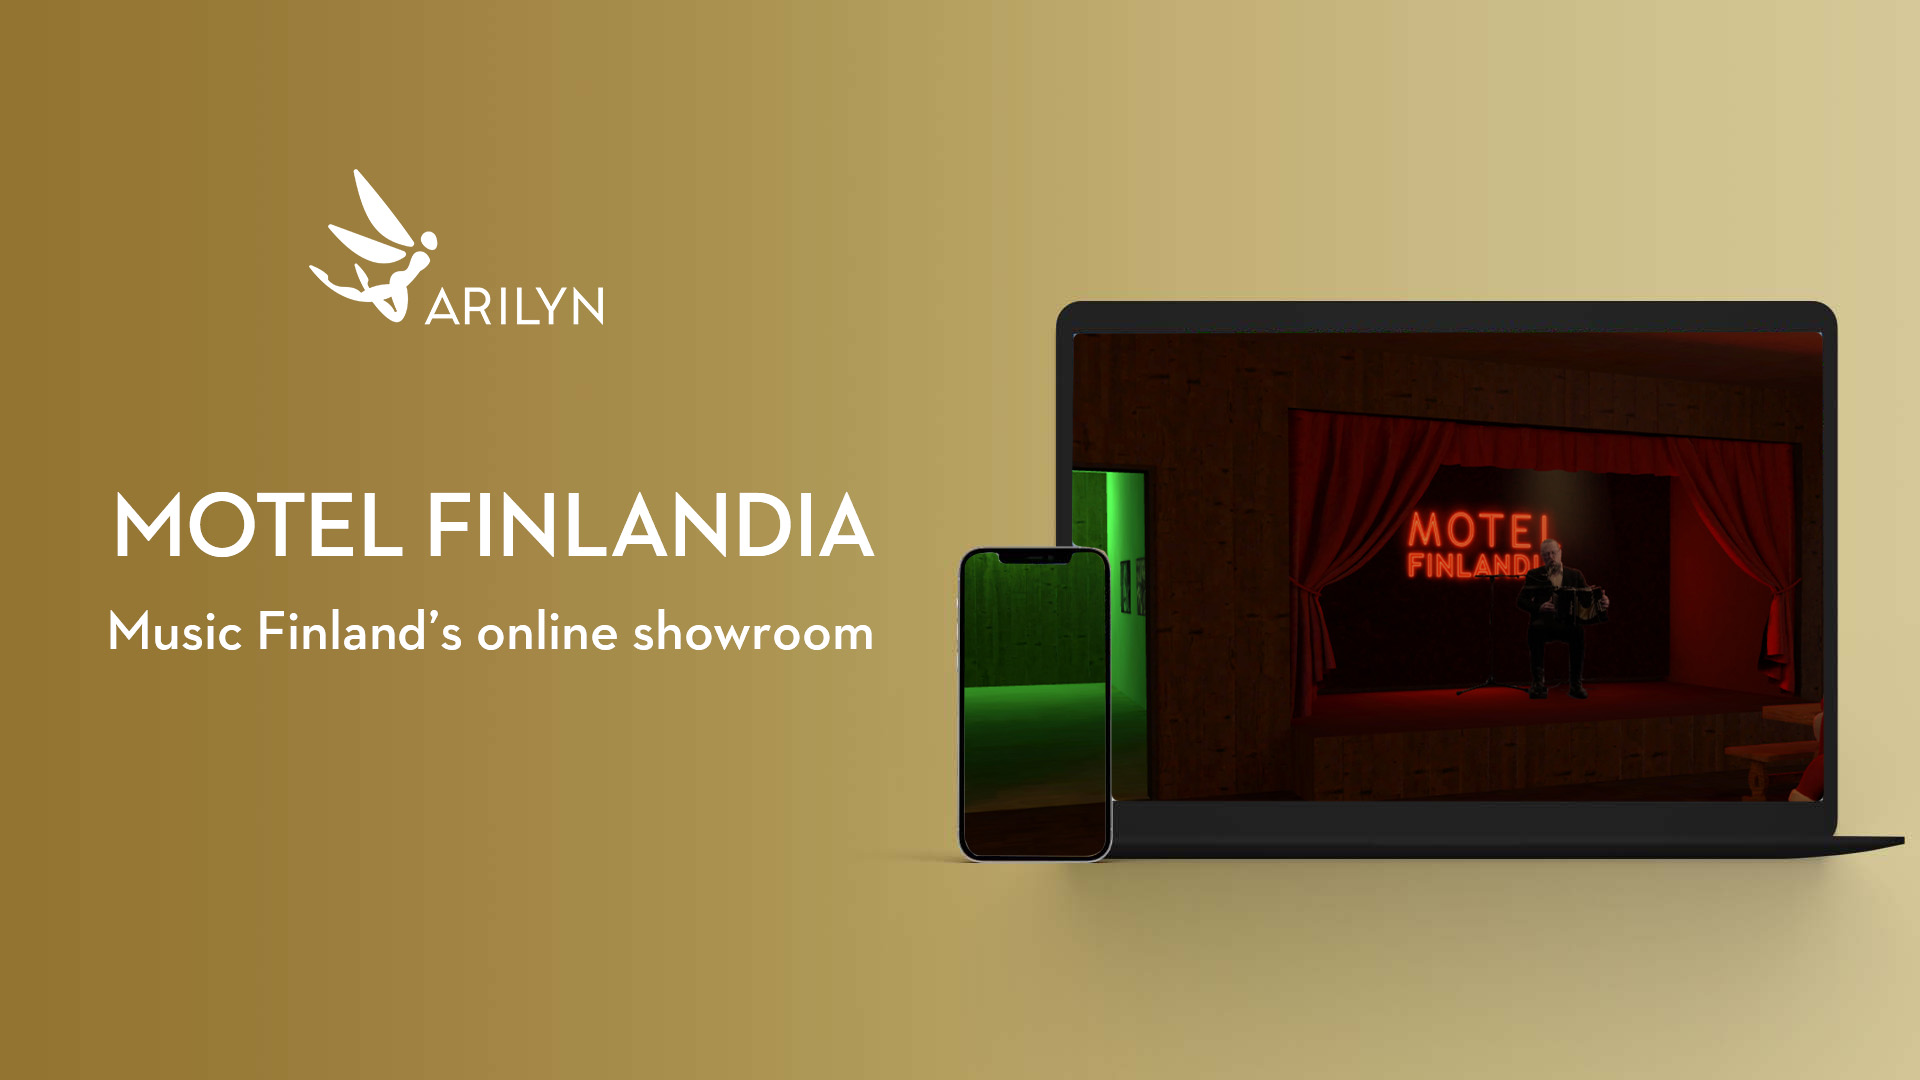 Music Finland promotes music in an online showroom